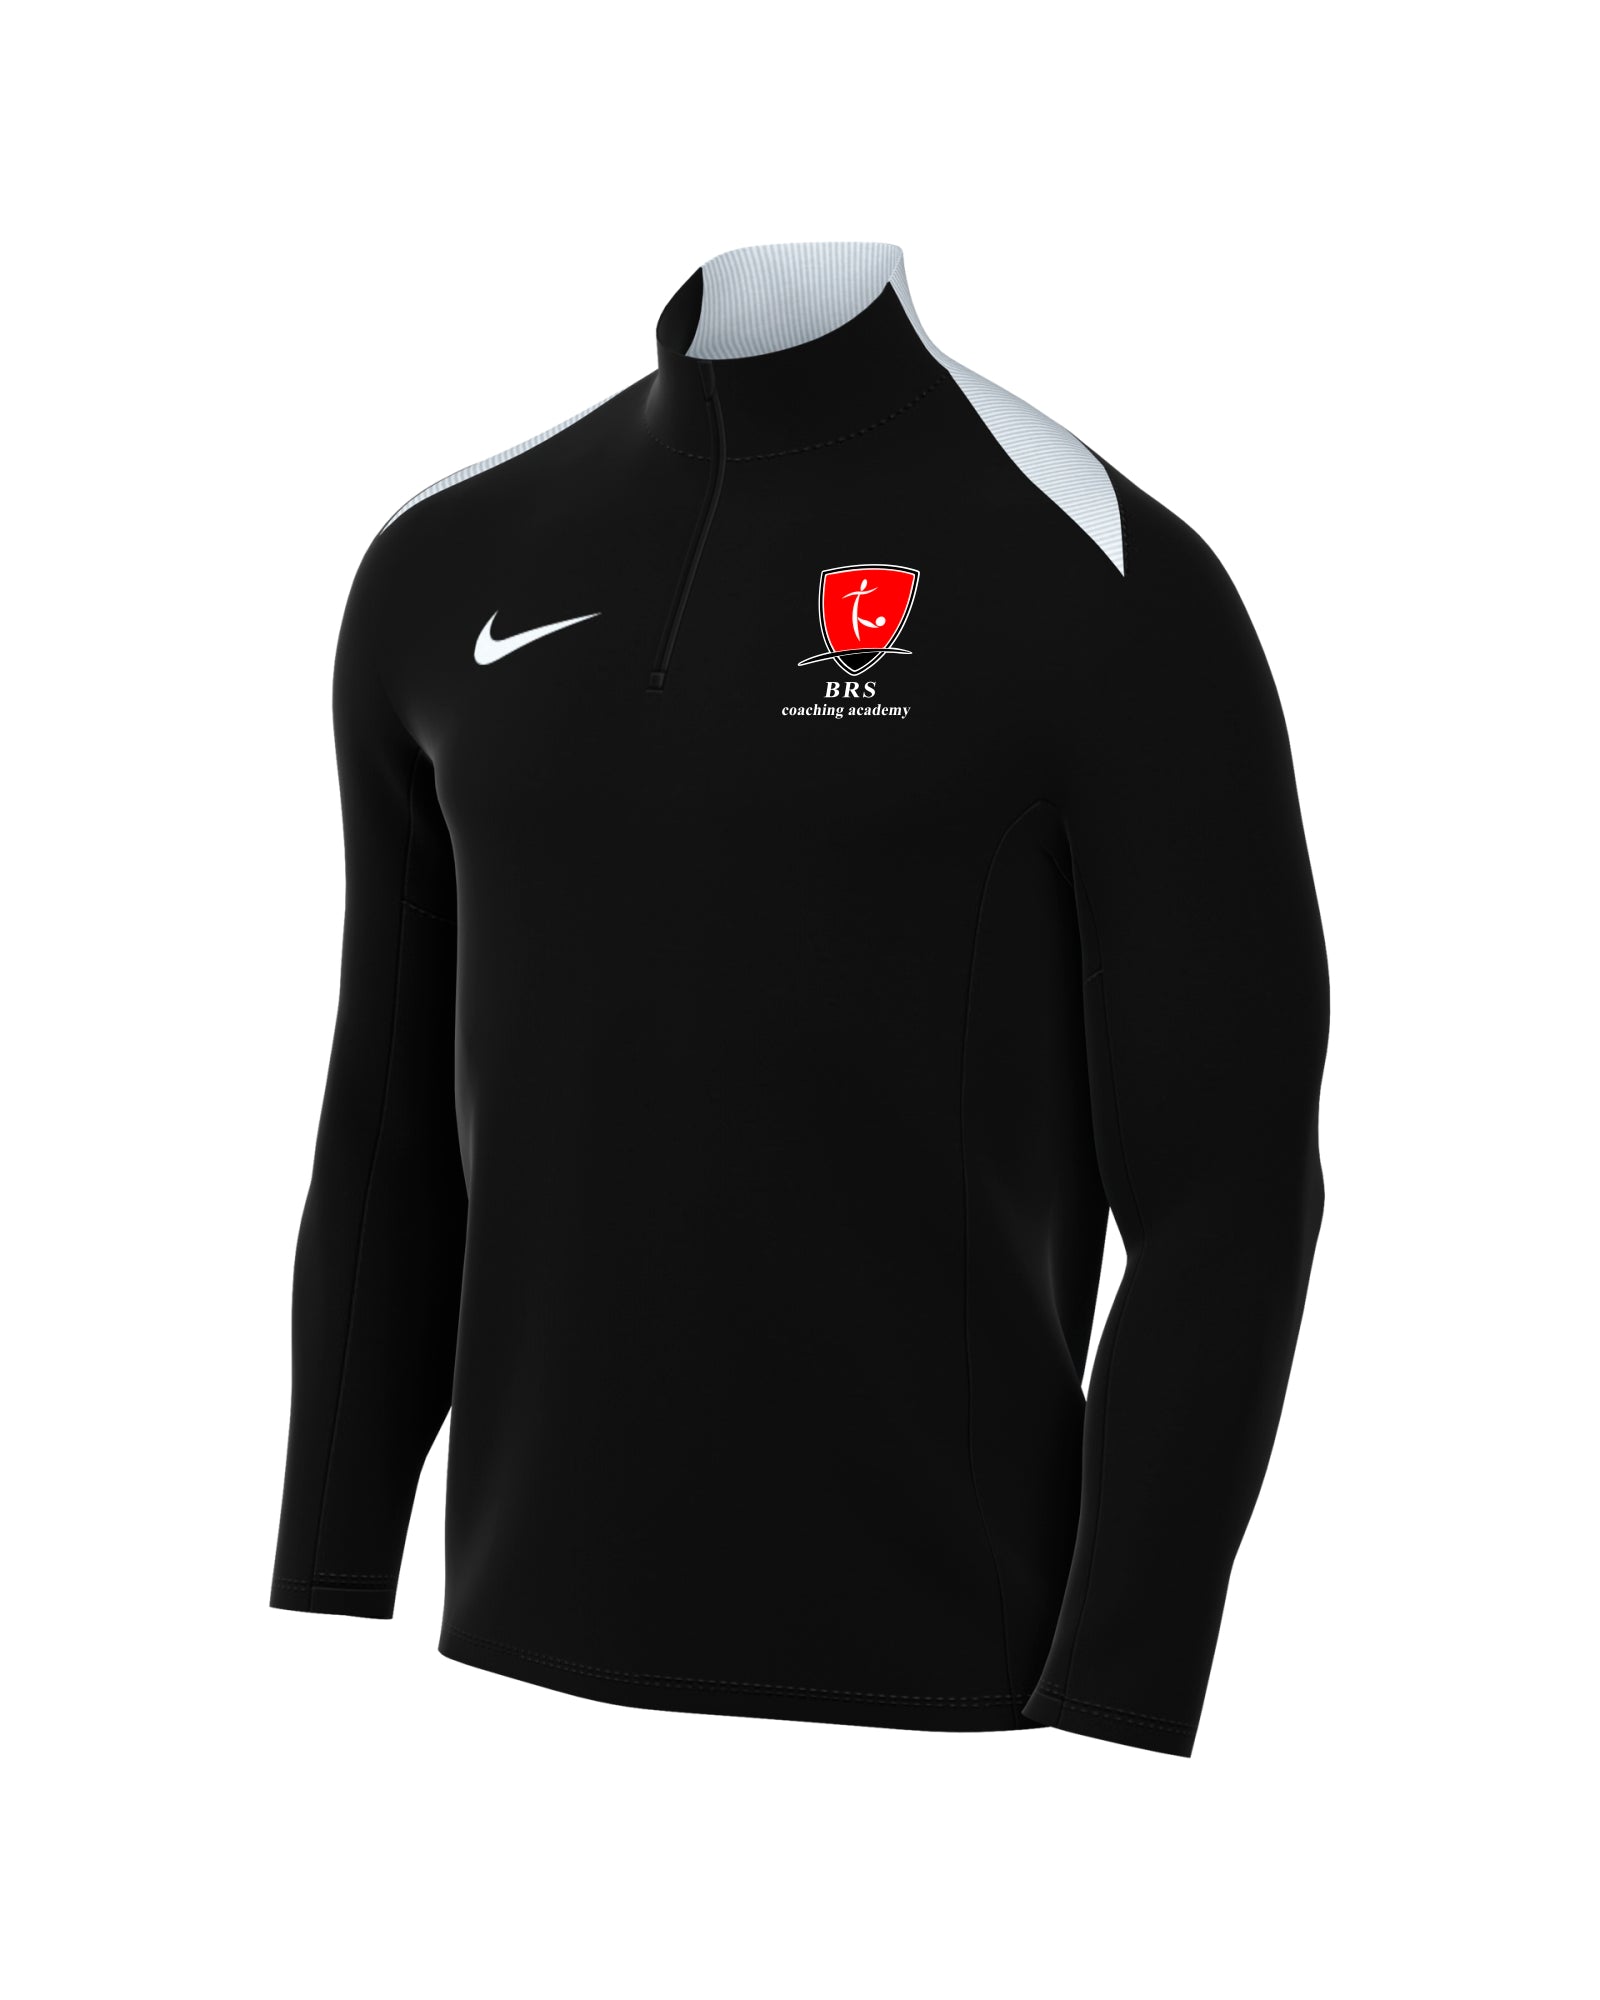 BRS Coaches - Nike Academy 24 Drill Top - Black